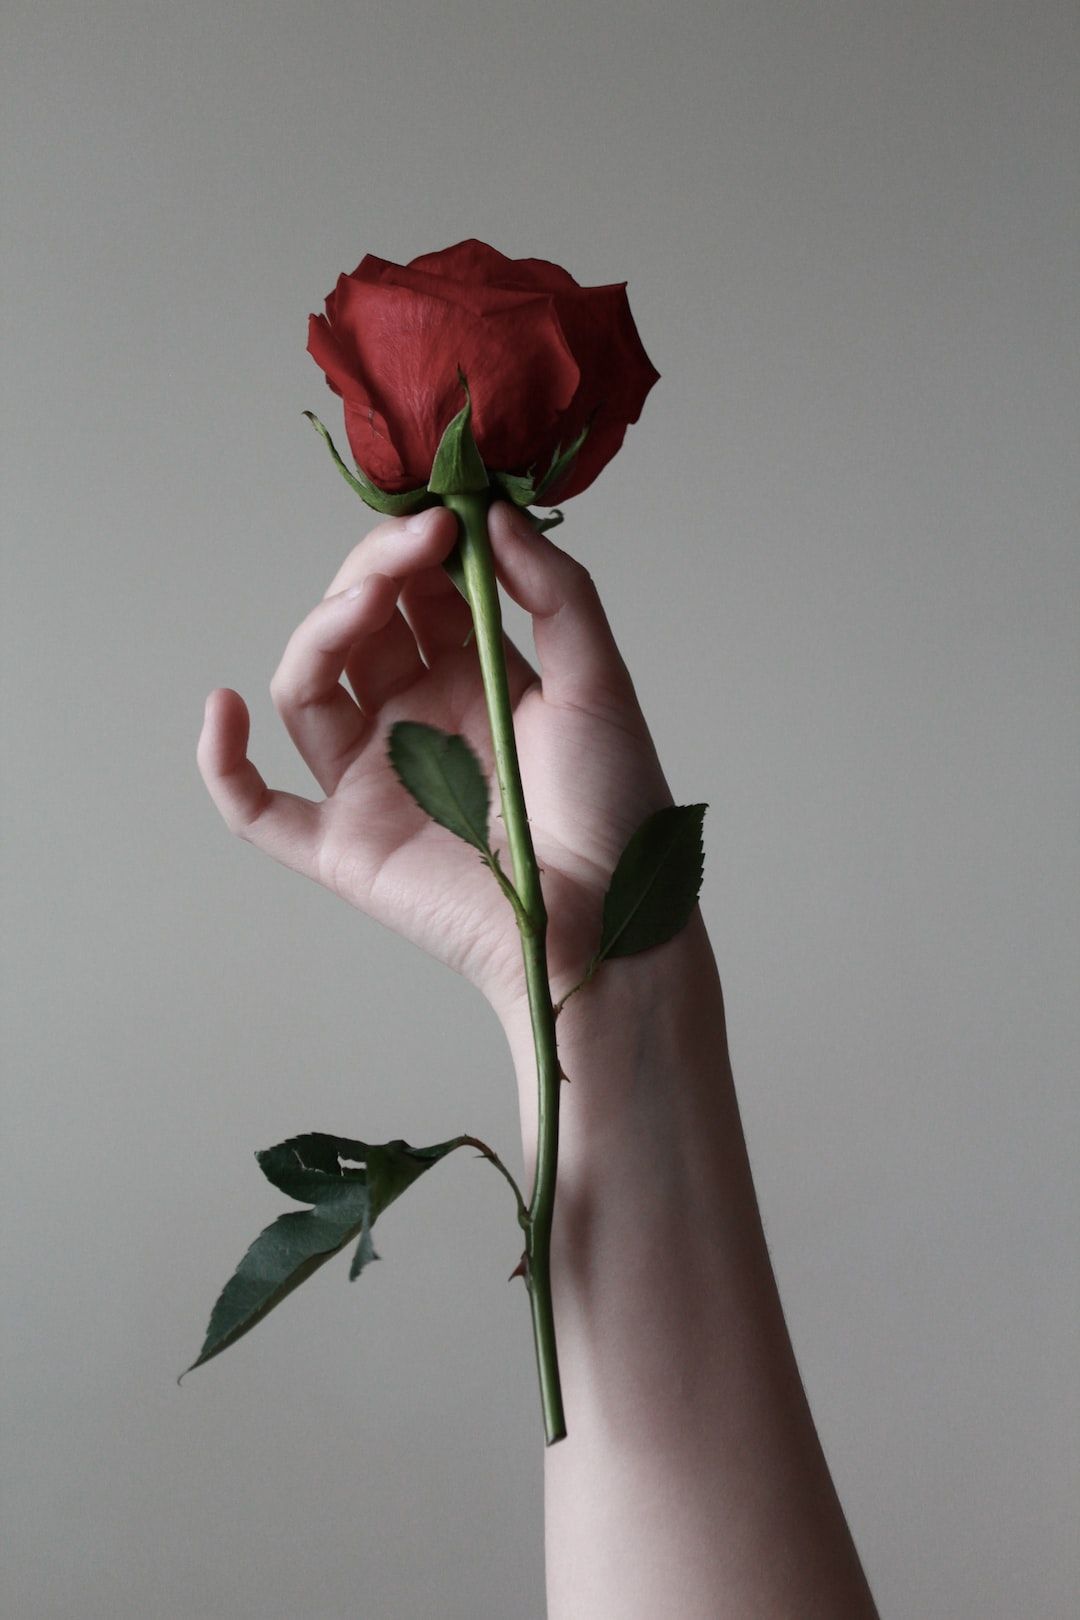 A hand holding a red rose against a white background - Black rose